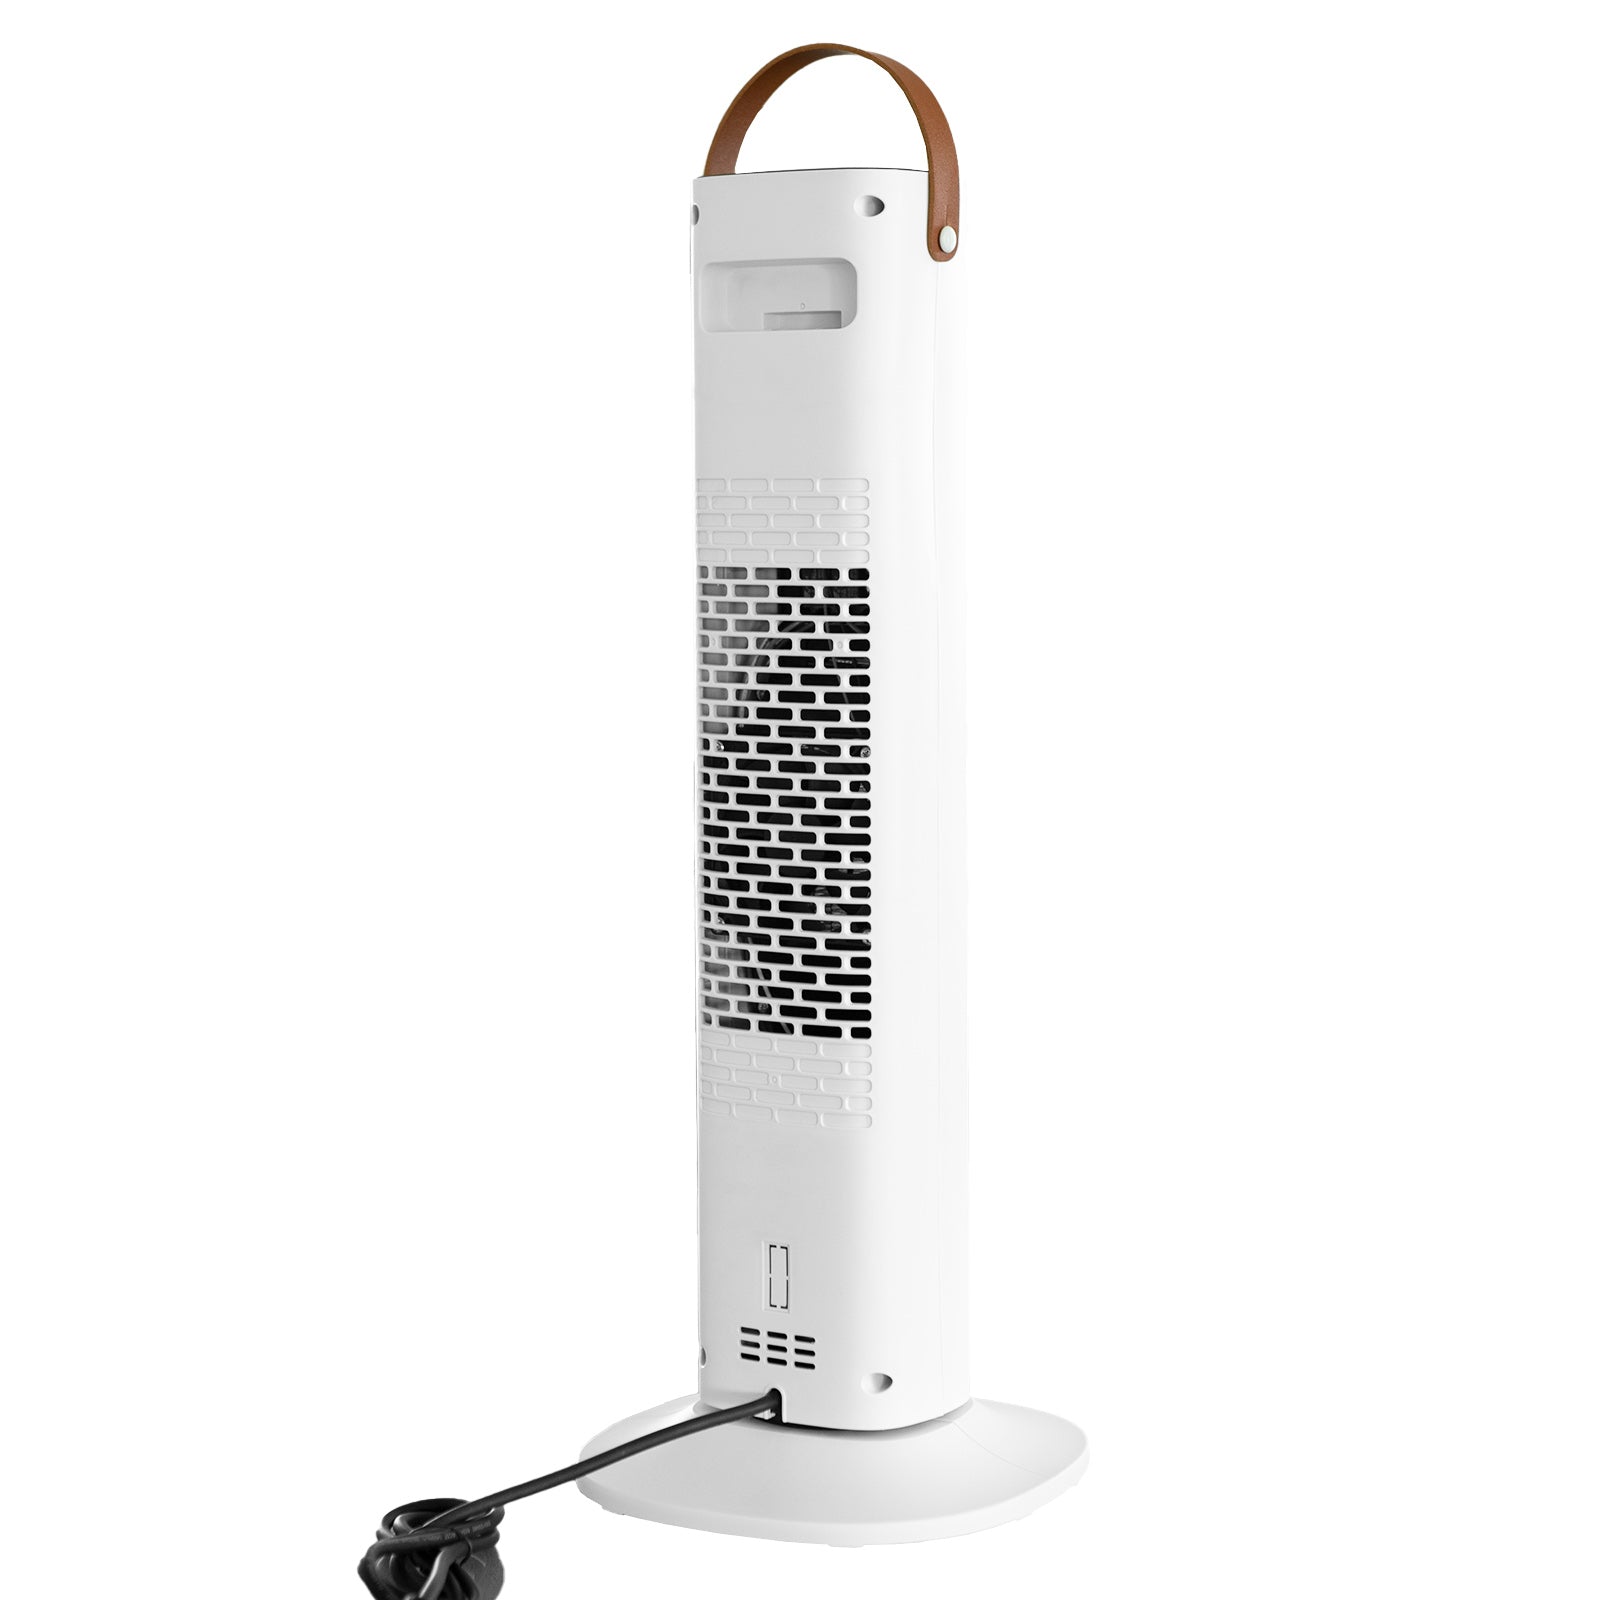 Electric Ceramic Tower Heater Remote Control Portable OVanting - White